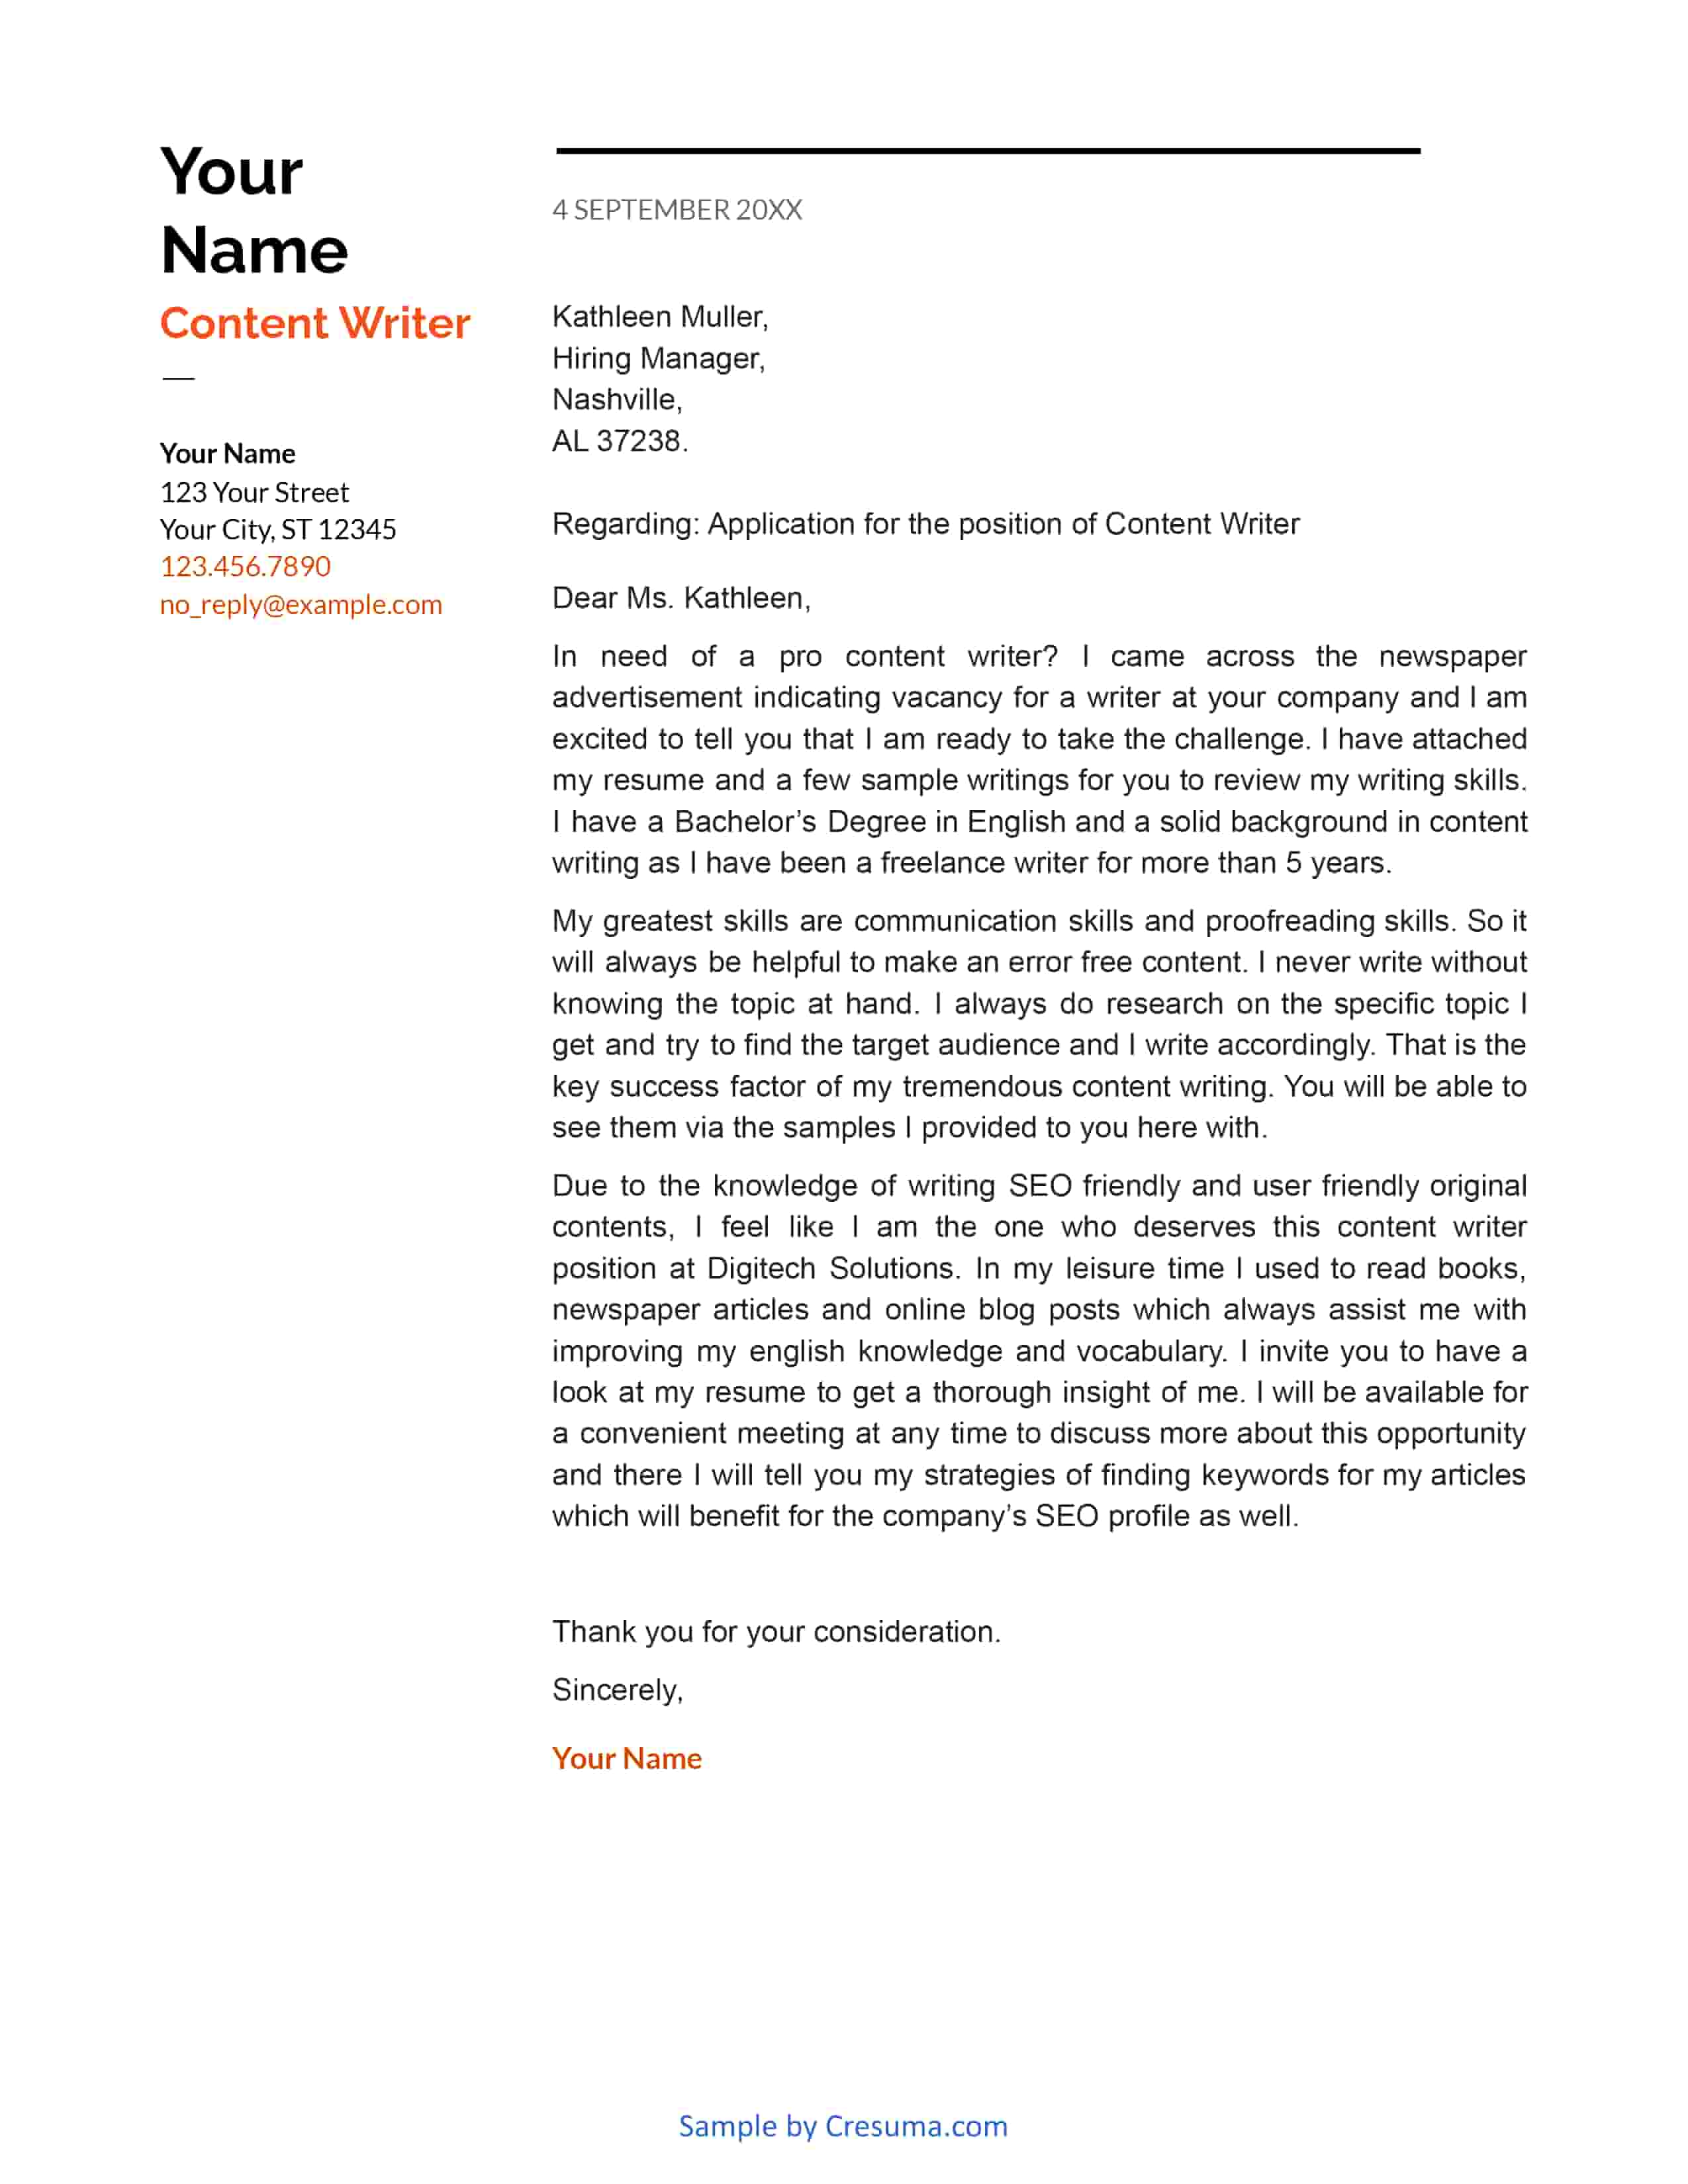 Content writer cover letter example template 1